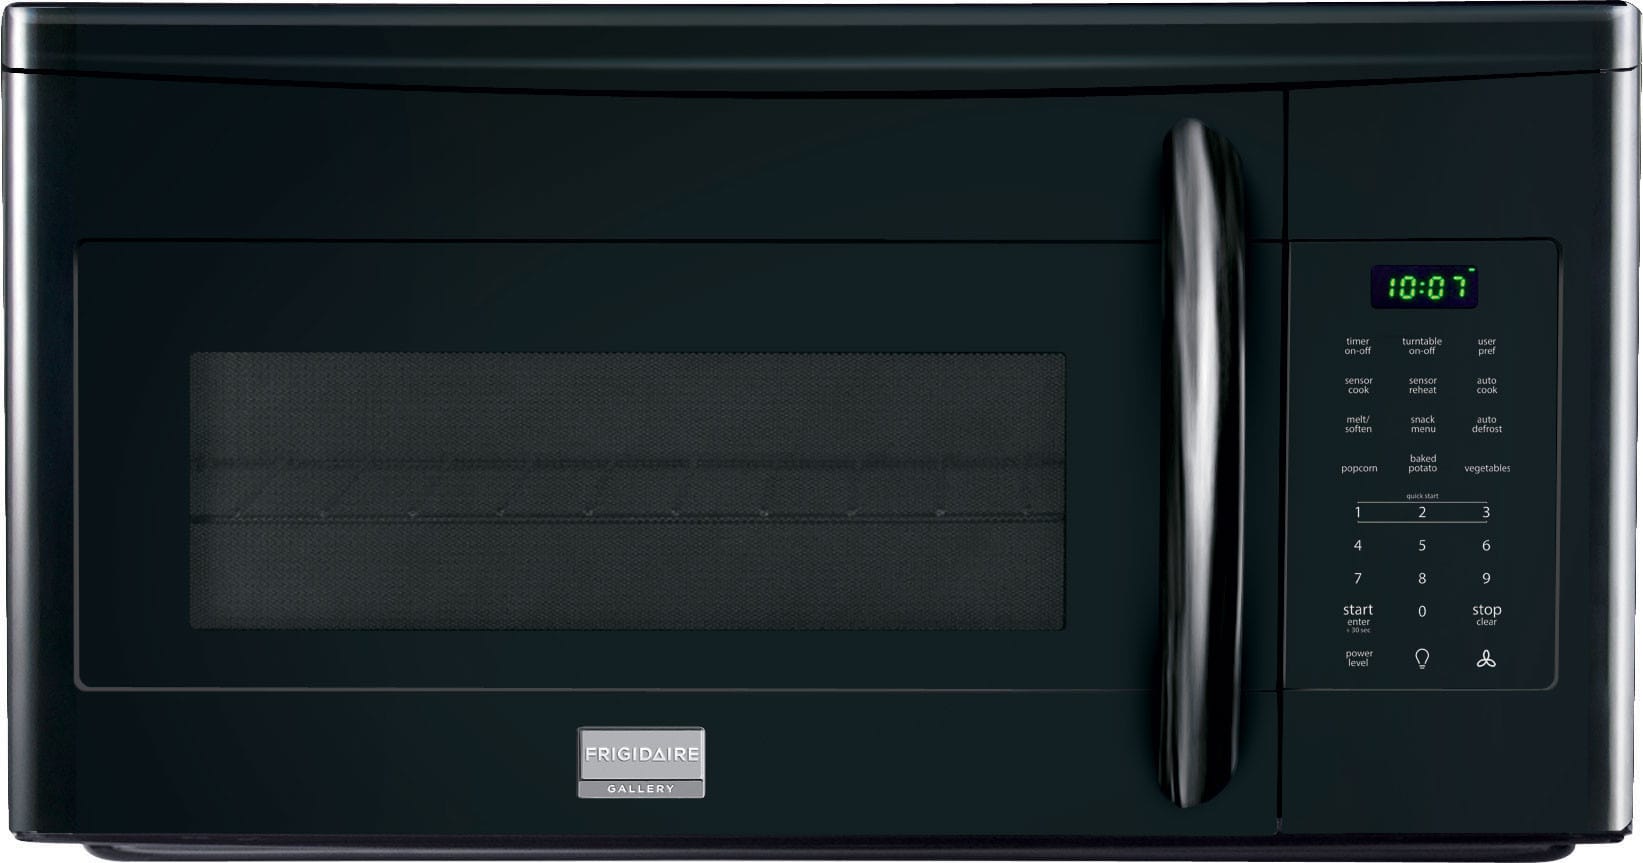 Frigidaire FGMV175QB 30 Inch Over-the-Range Microwave Oven with